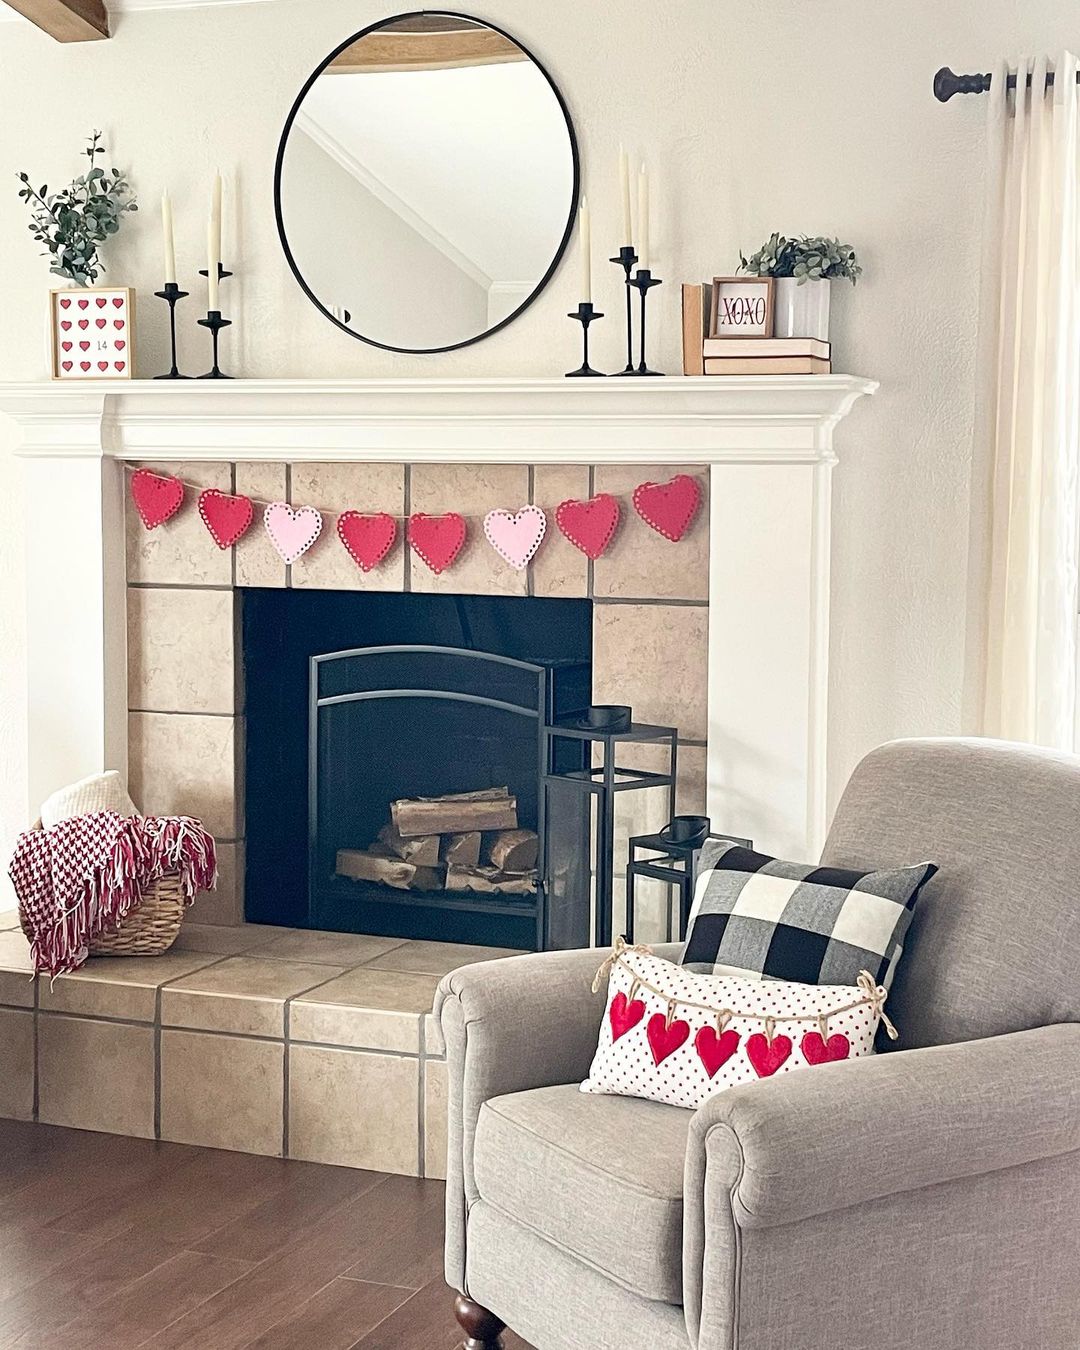 decorate fireplace for valentines day